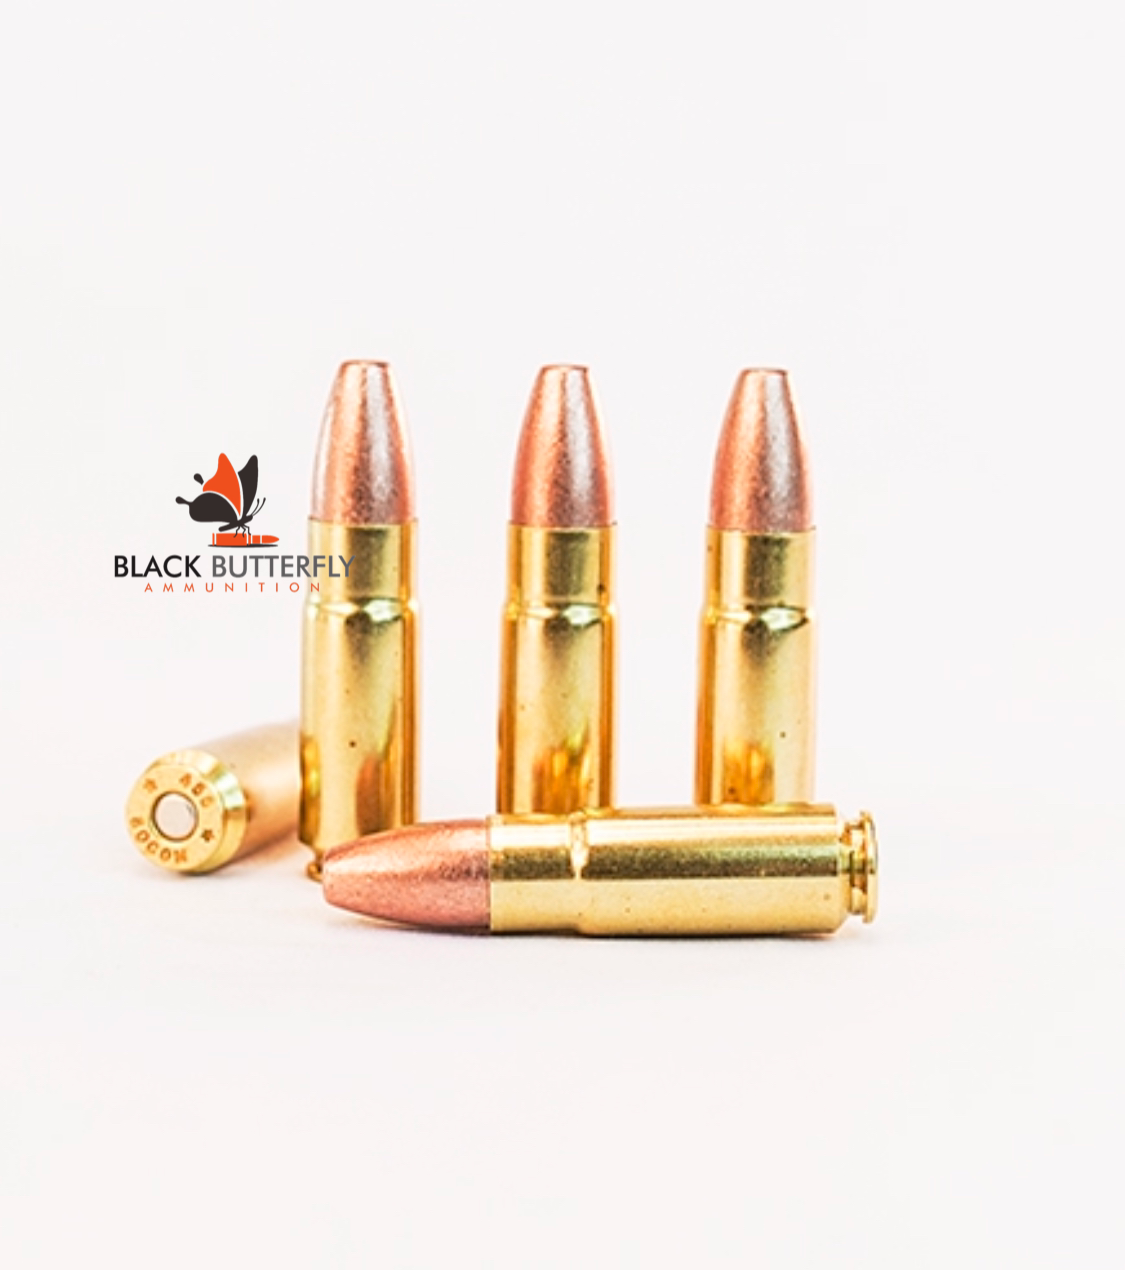 Black Butterfly Ammunition Premium, .458 SOCOM, 300 gr, 20 Rounds, CTX Migration Lead Free Frangible, No. 2 High Velocity